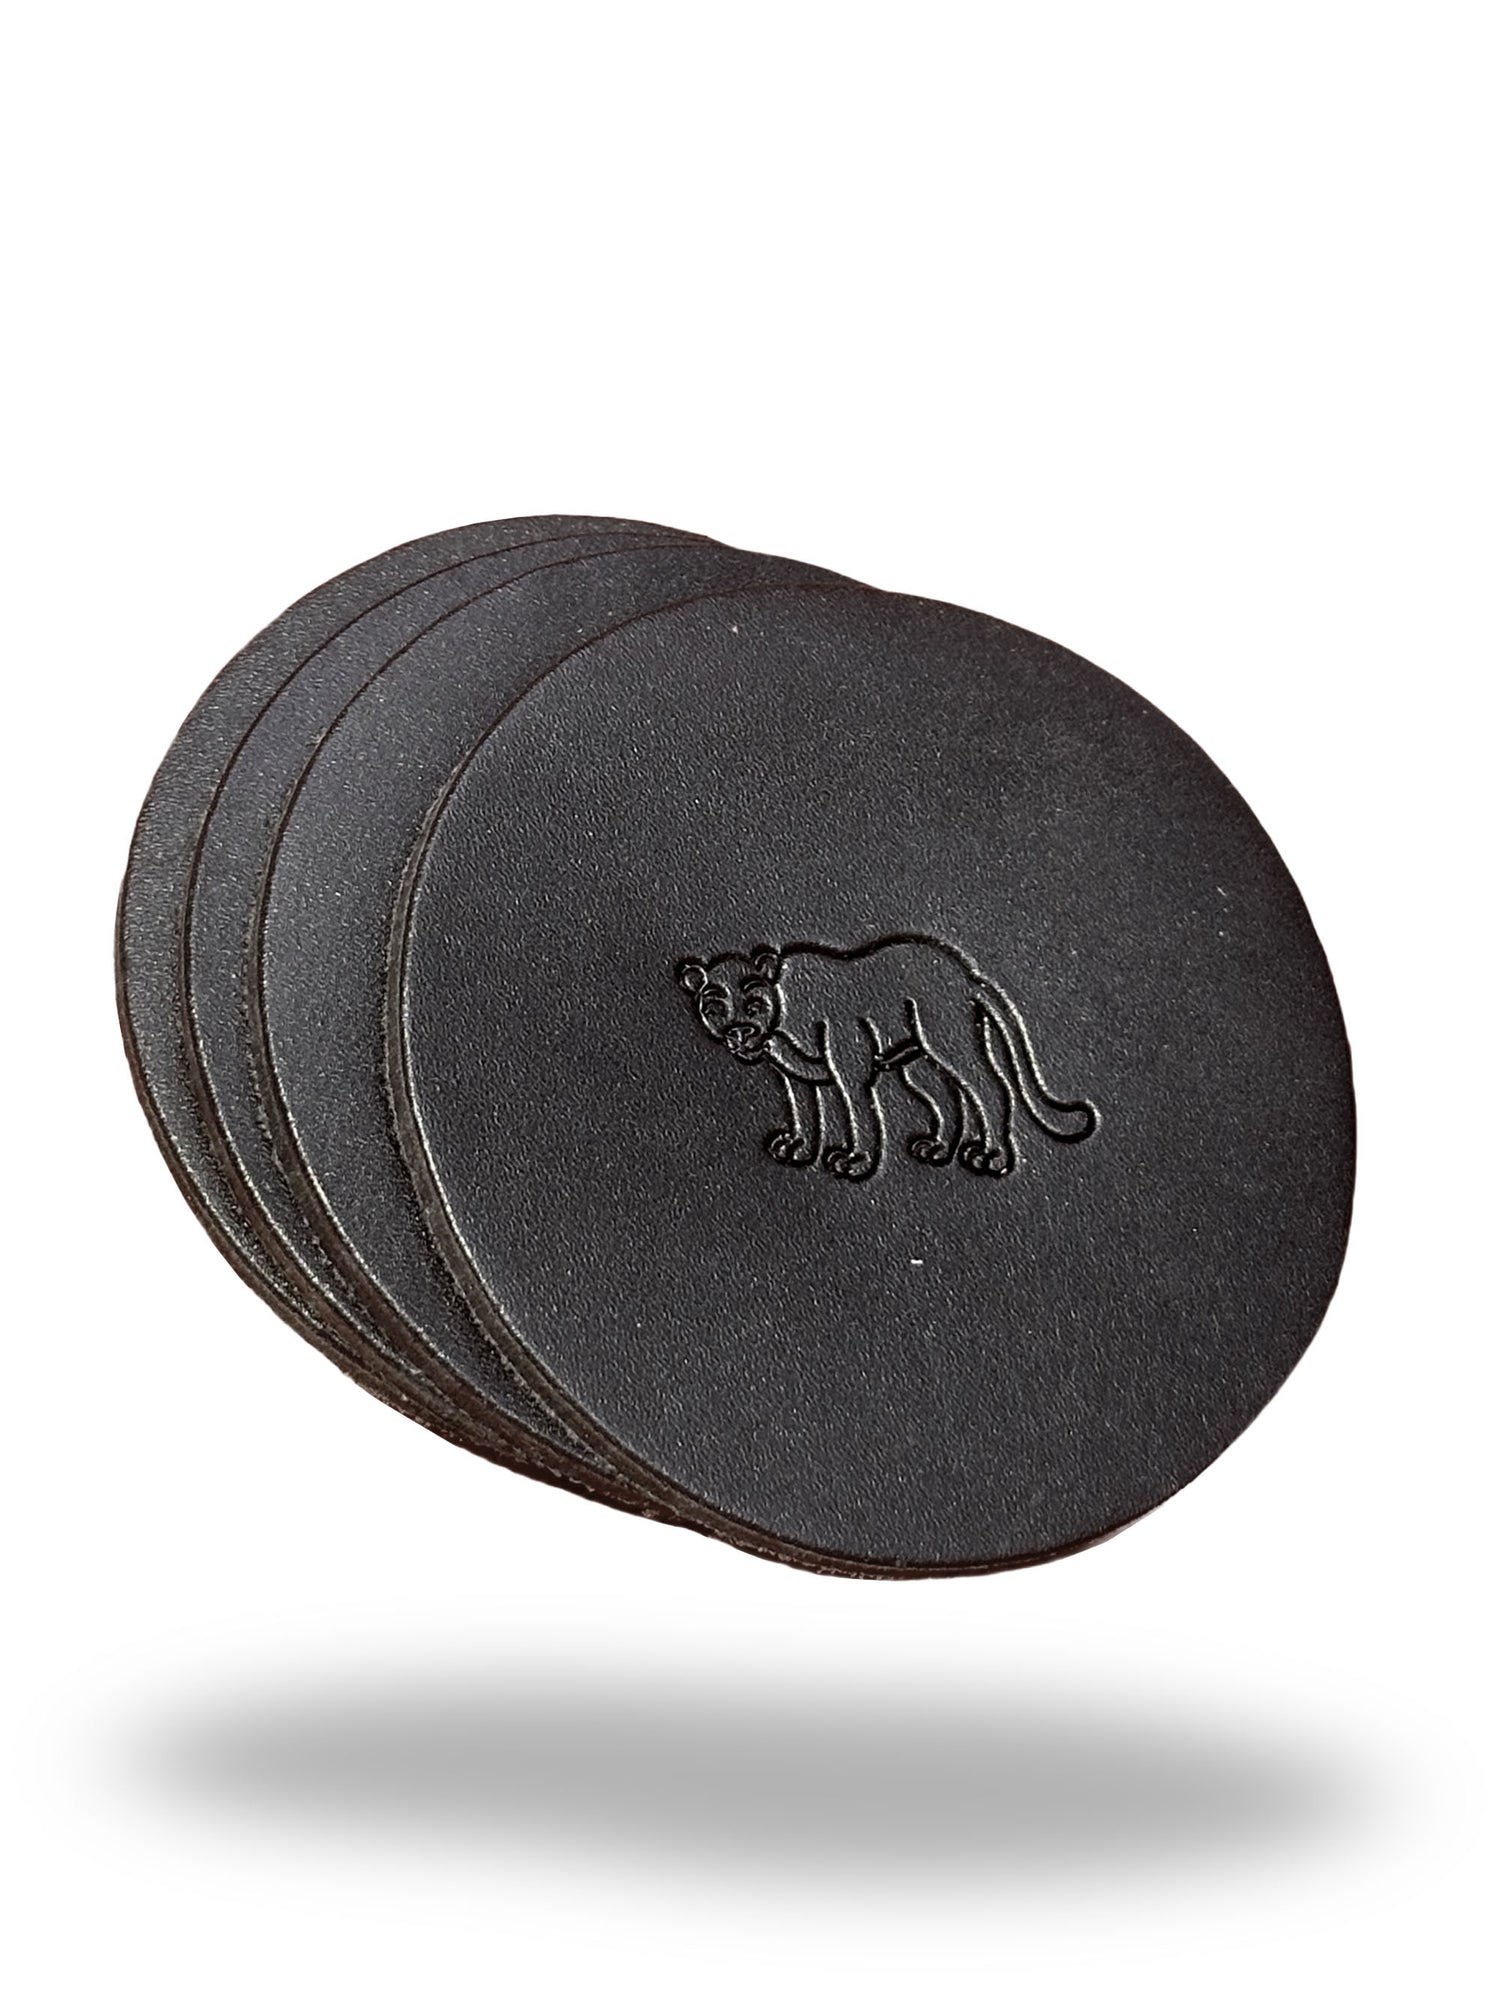 Round Leather Coasters with Lion Design - Set of 4